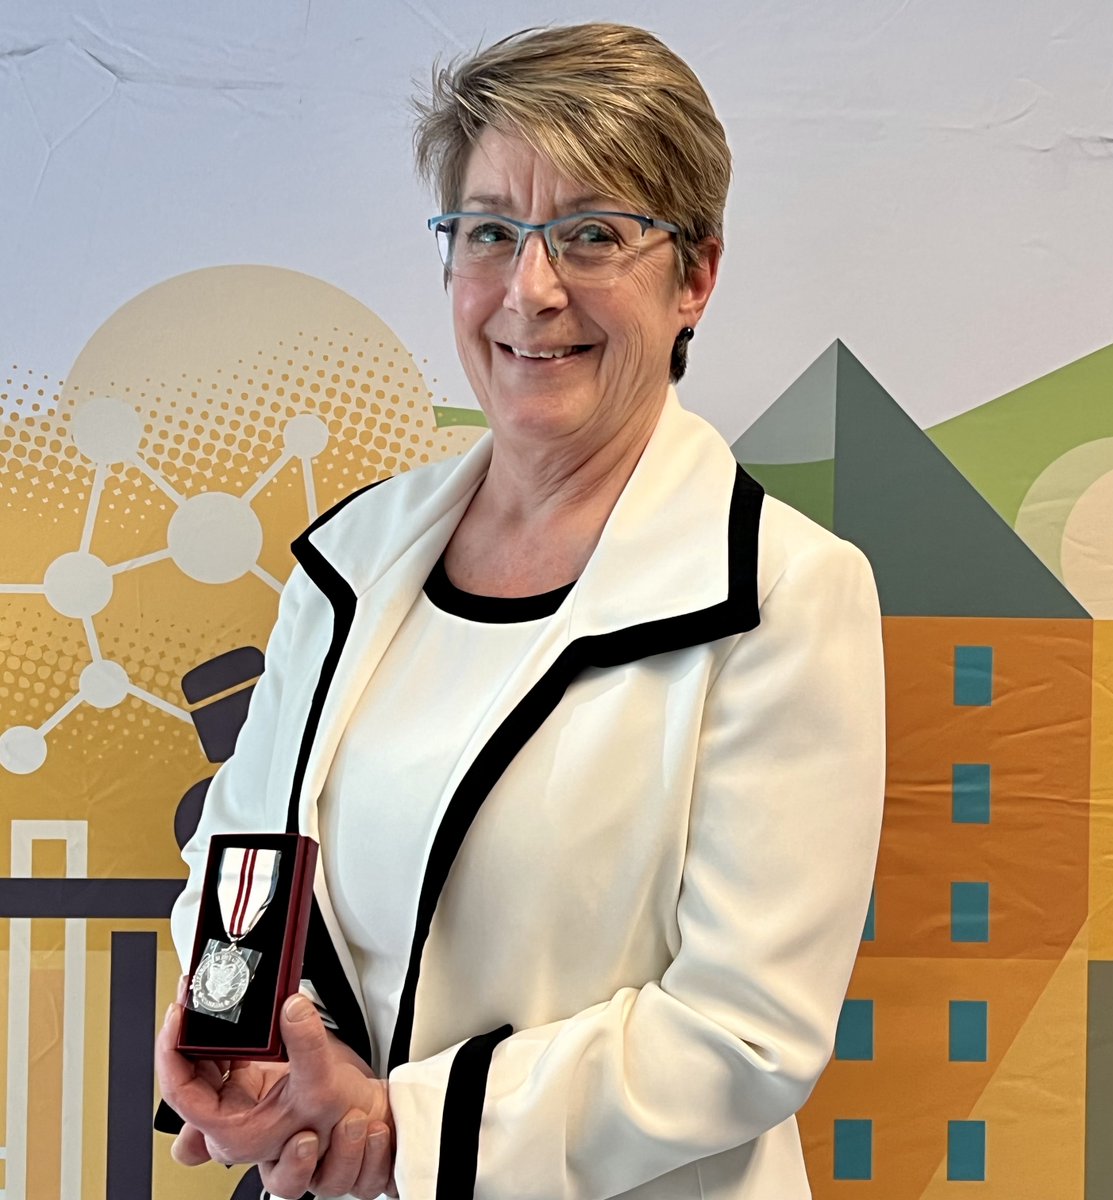 Tracy Wasylak, the Chief Program Officer of AHS' SCN, has been awarded the Queen Elizabeth II Platinum Jubilee Medal, and we extend our heartfelt congratulations to her. Tracy has brought creative & groundbreaking solutions to both the people of Alberta and our healthcare system.